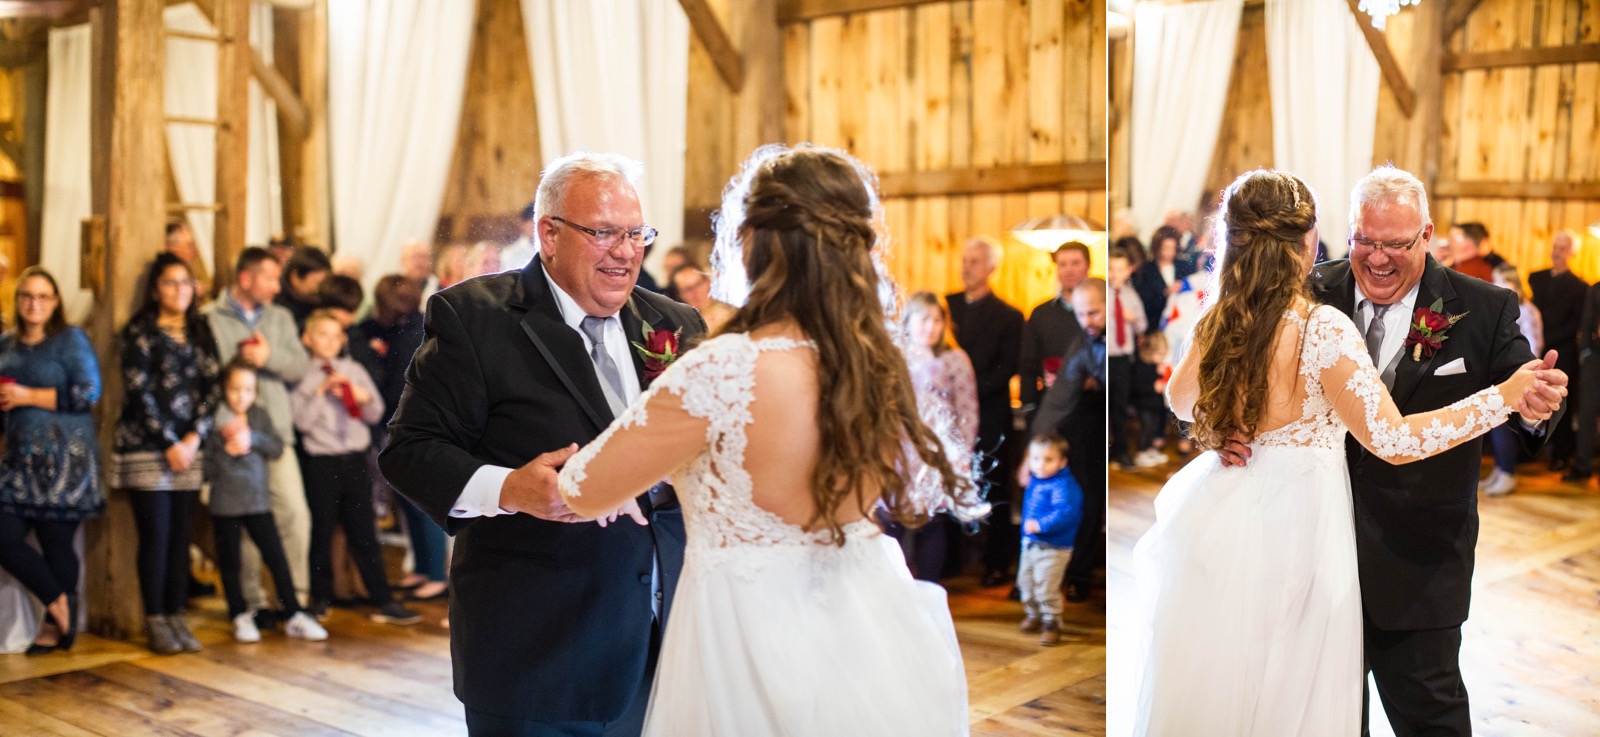 52_bride-dancing-with-father